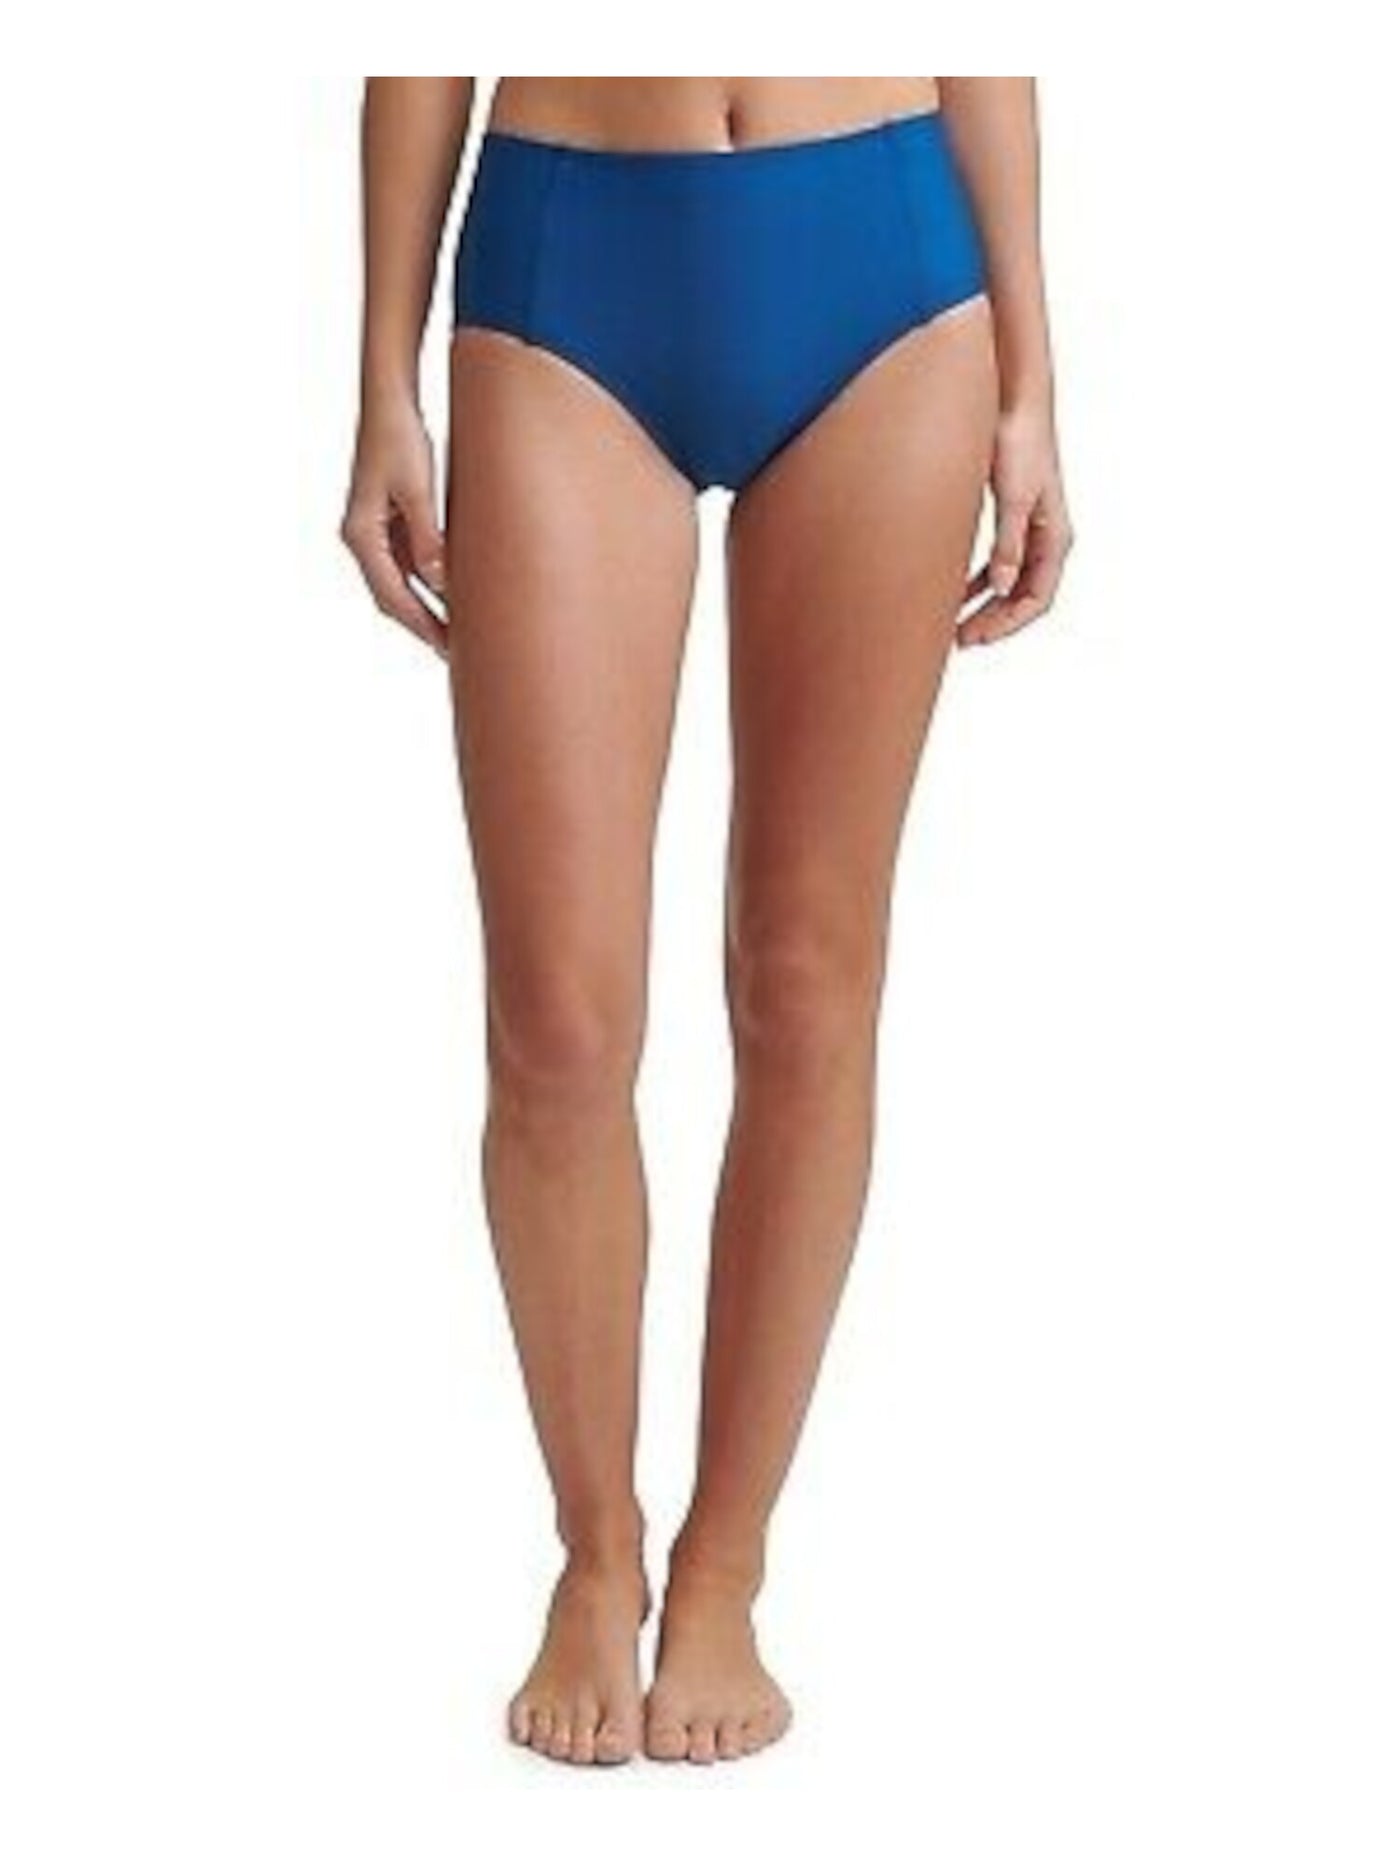 DKNY Women's Blue Stretch Seaming At Front Lined Full Coverage High Waisted Swimsuit Bottom XL